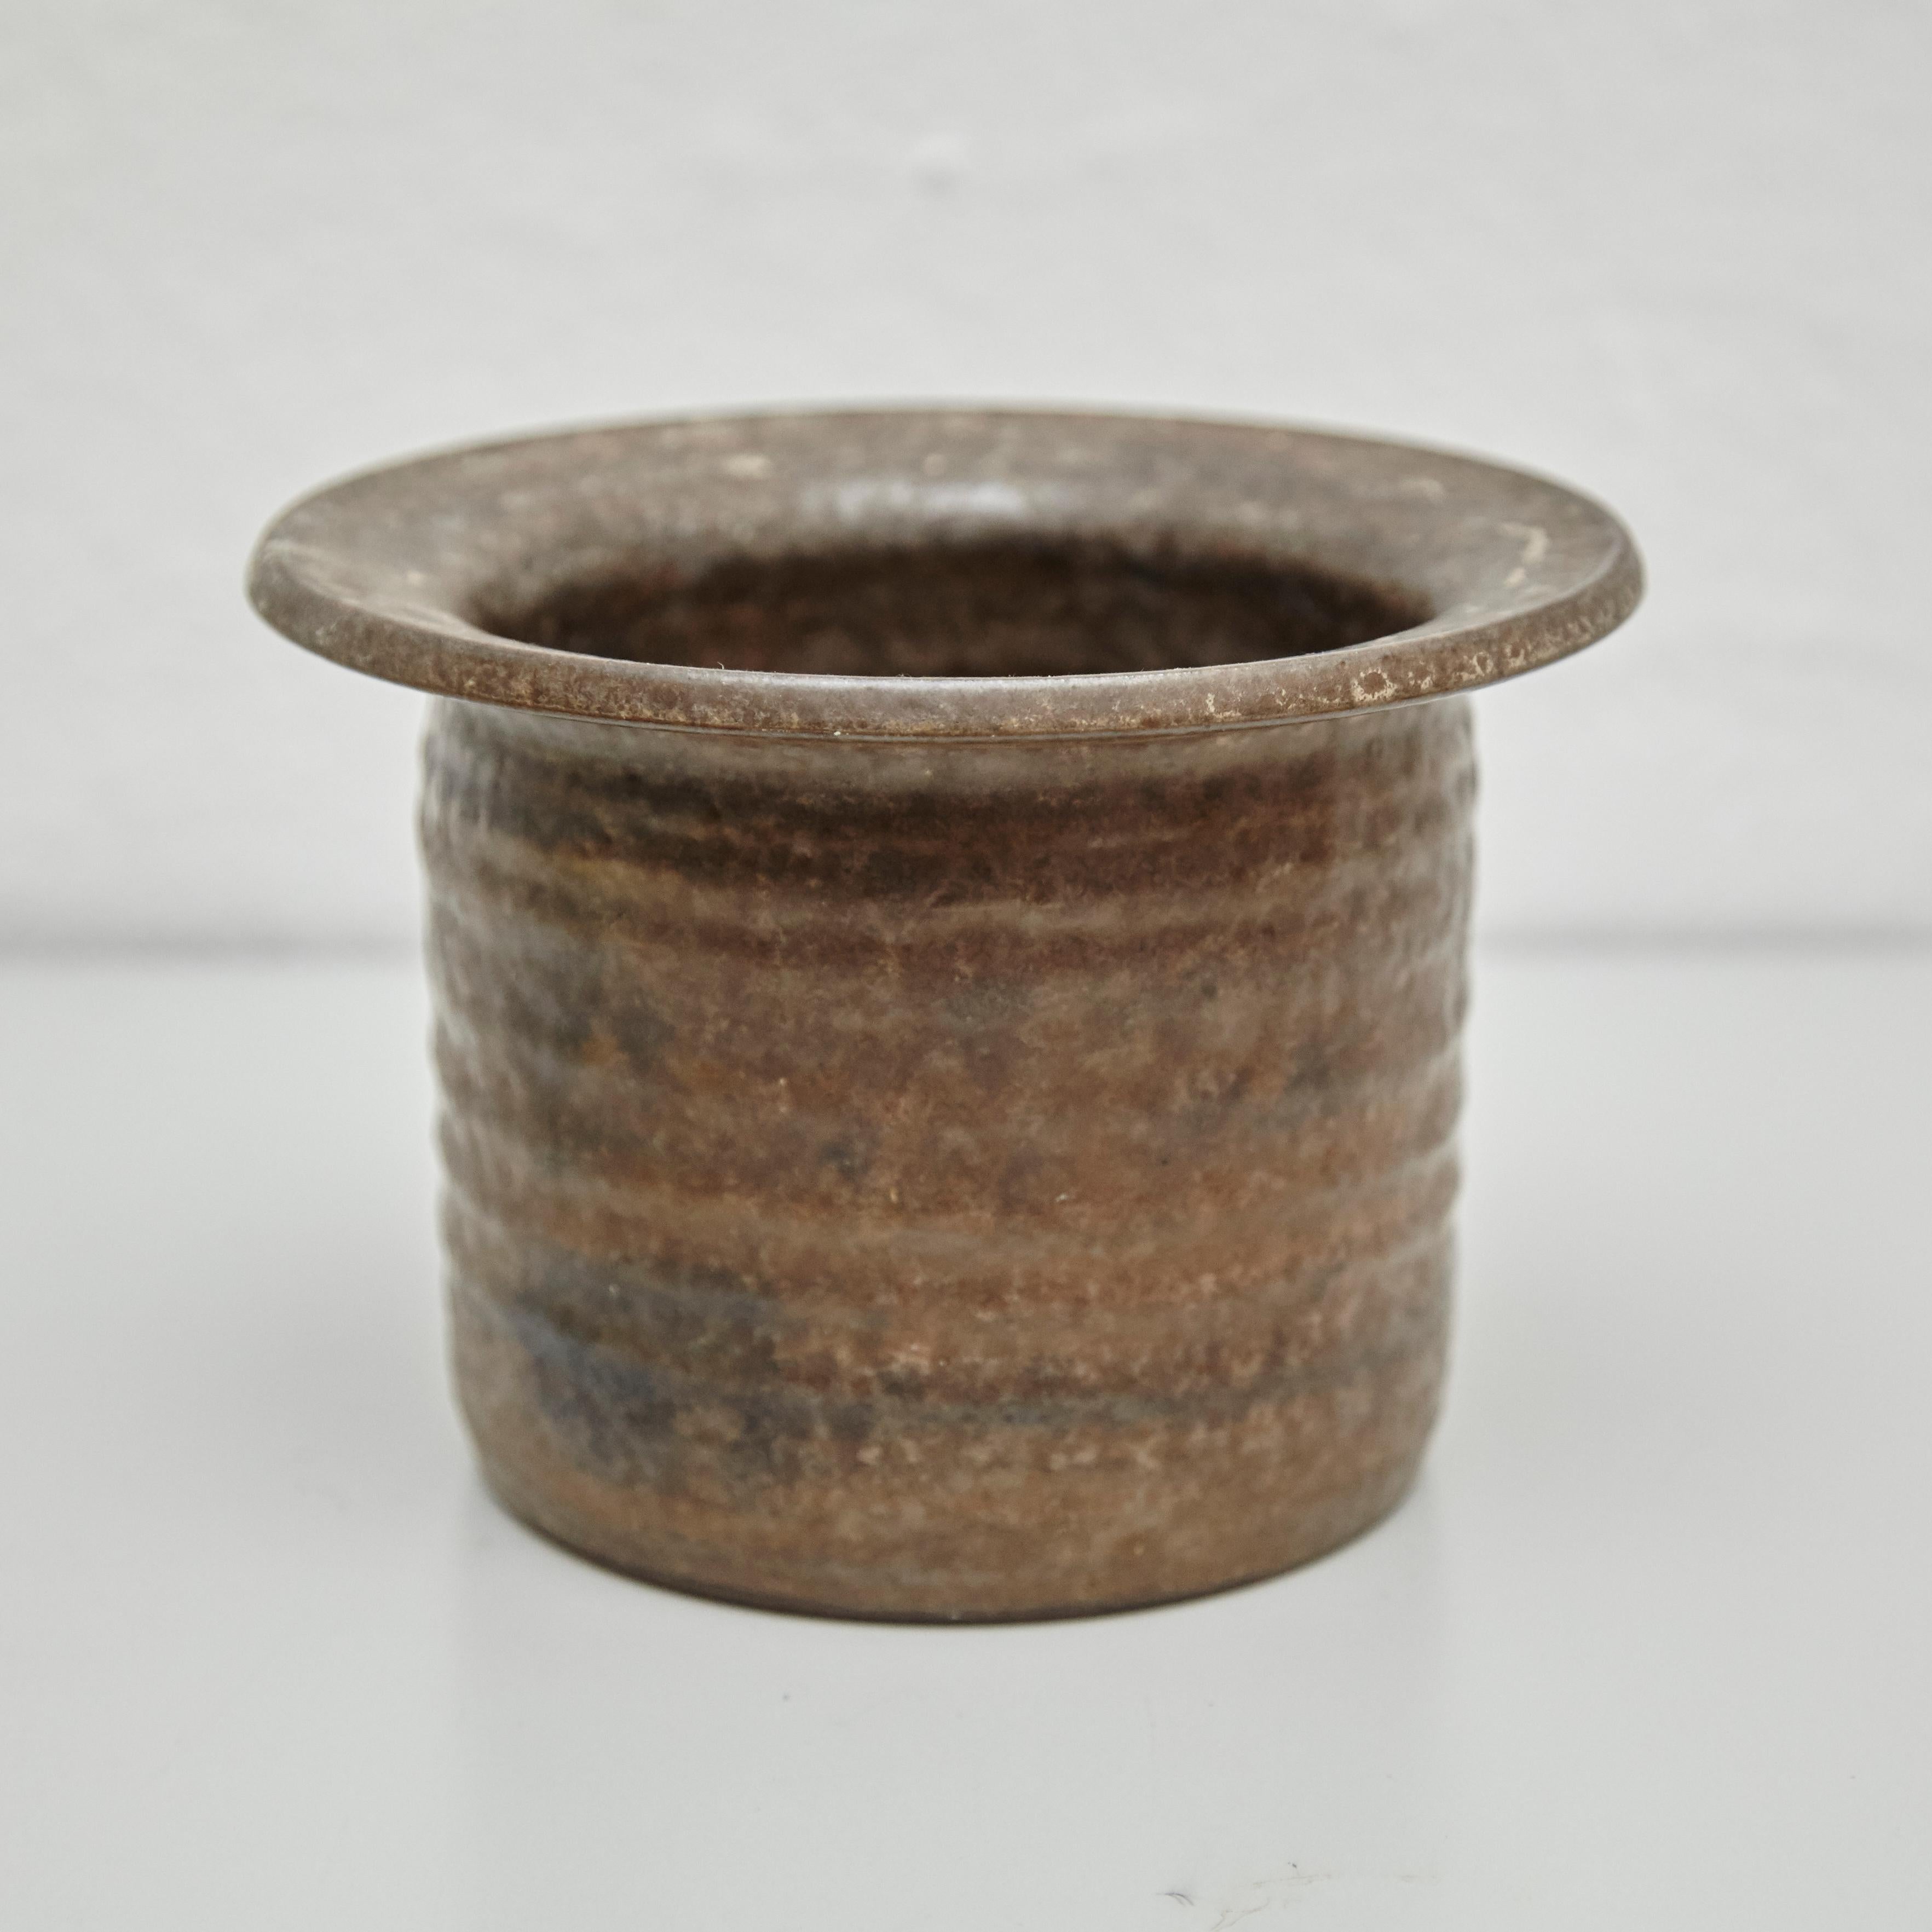 20th century popular traditional ceramic.
By unknown artisan, France.
In original condition, with minor wear consistent with age and use, preserving a beautiful patina.

Materials:
Ceramic

Dimensions:
ø 16 cm x H 11.5 cm.